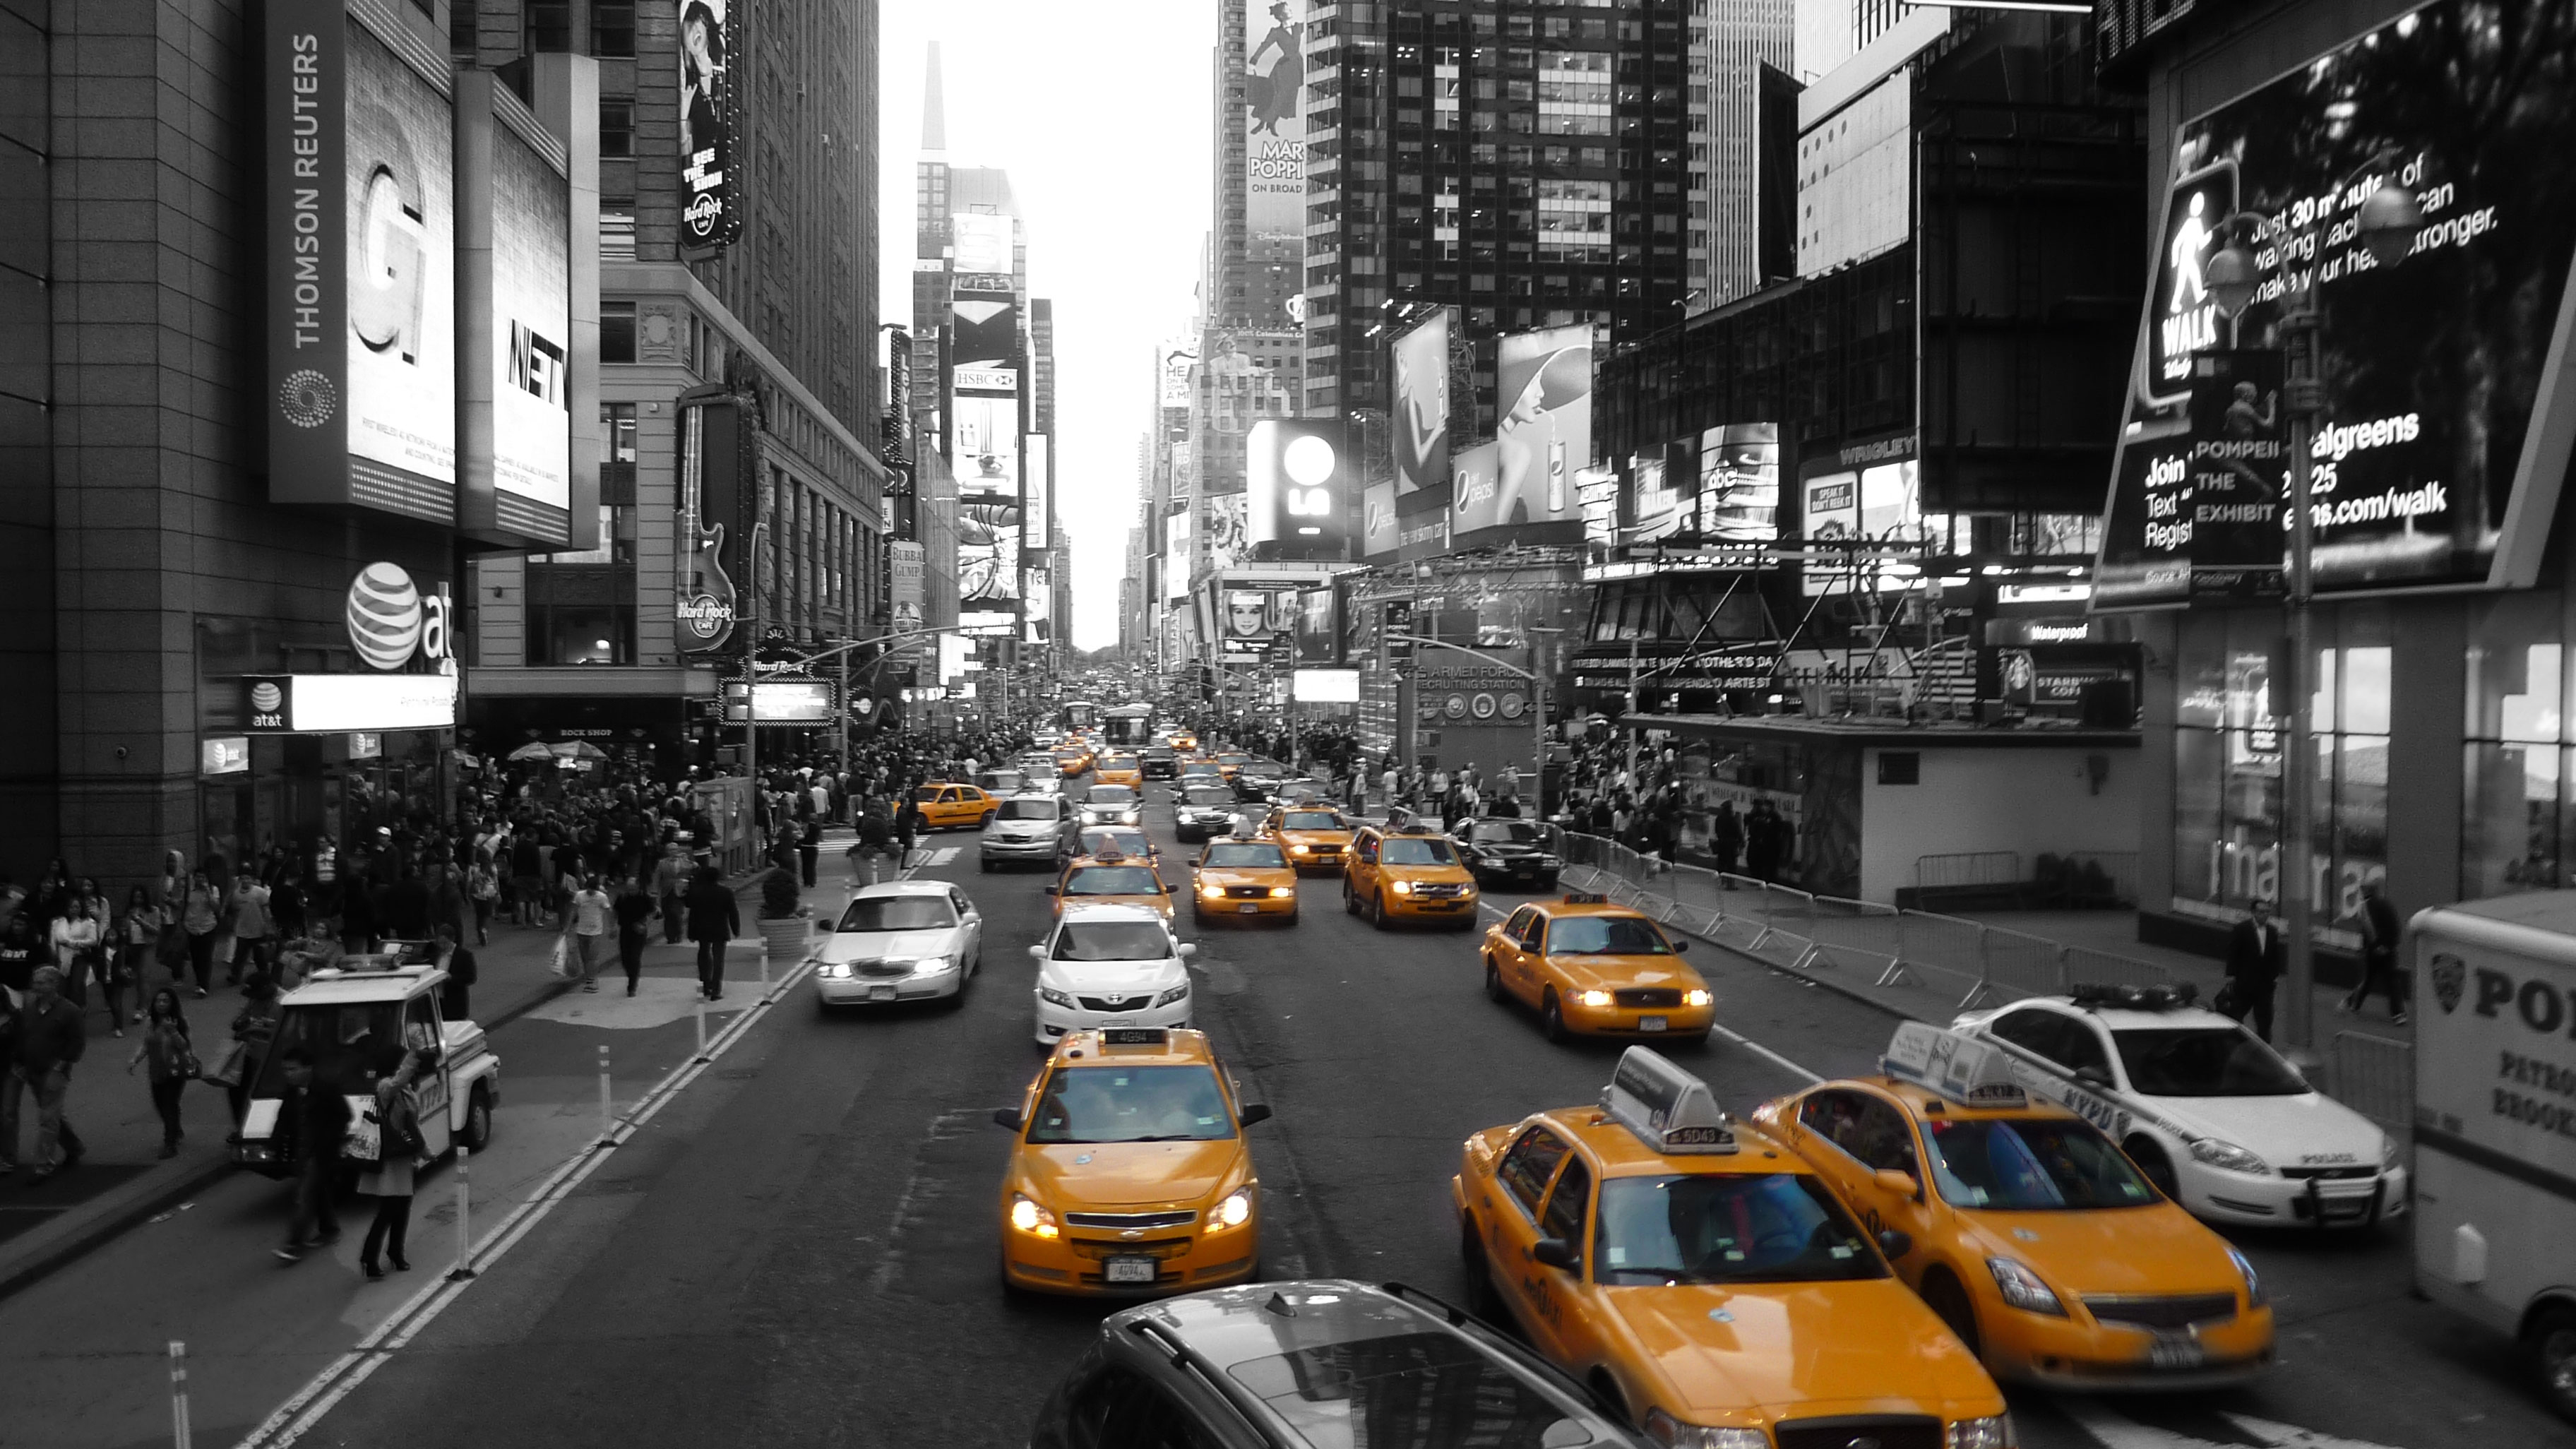 man made, new york, city, selective color, traffic, cities